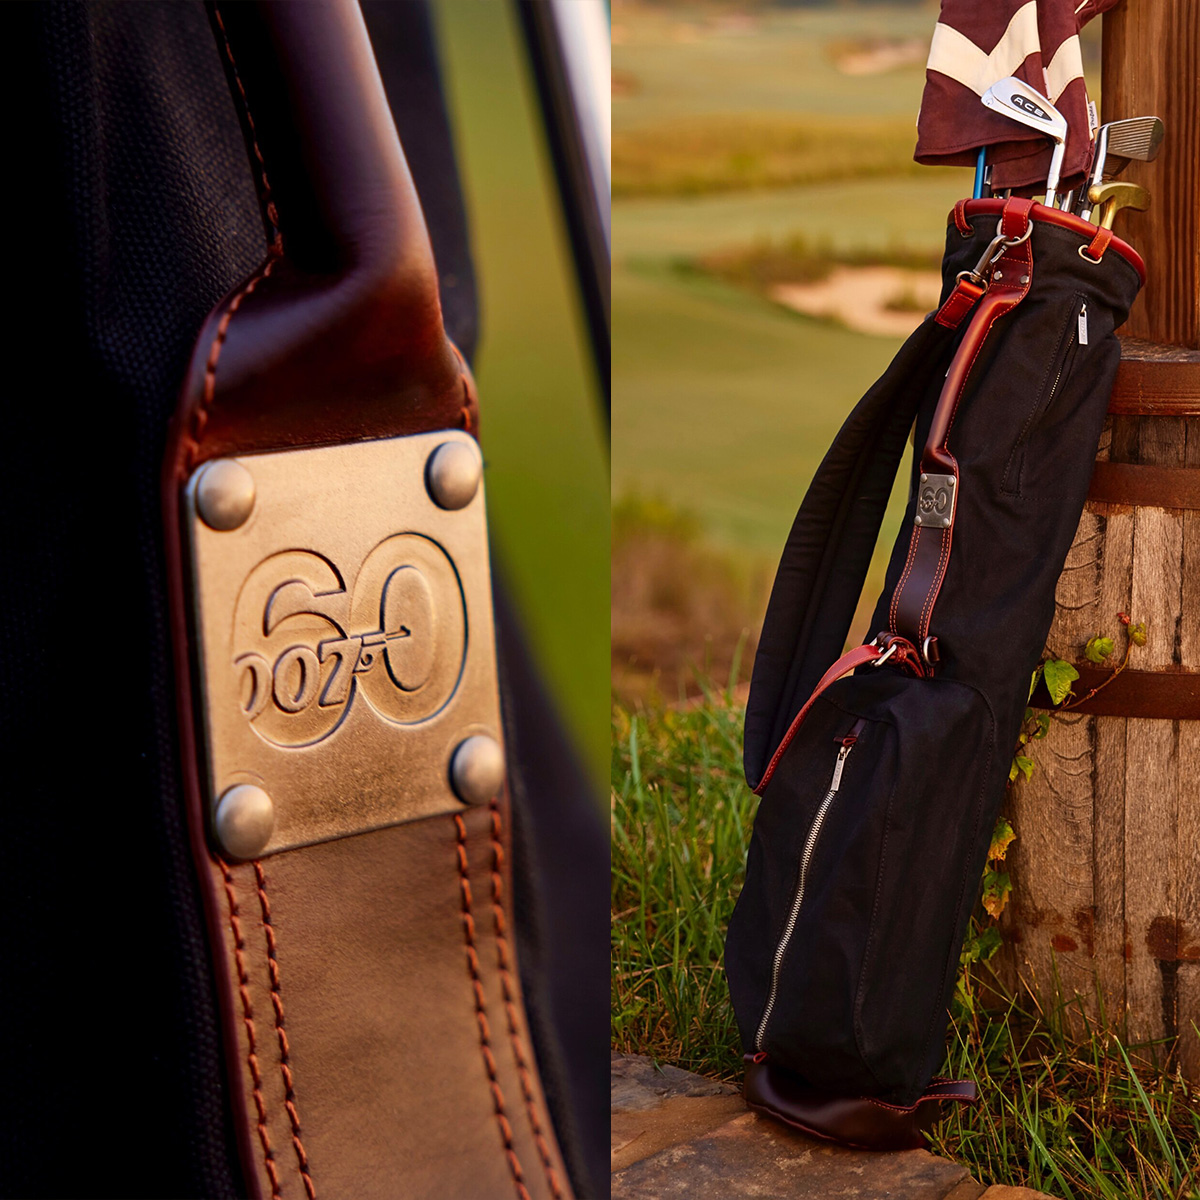 Penfold x 007 60th Anniversary Golf Bag and accessories | Bond